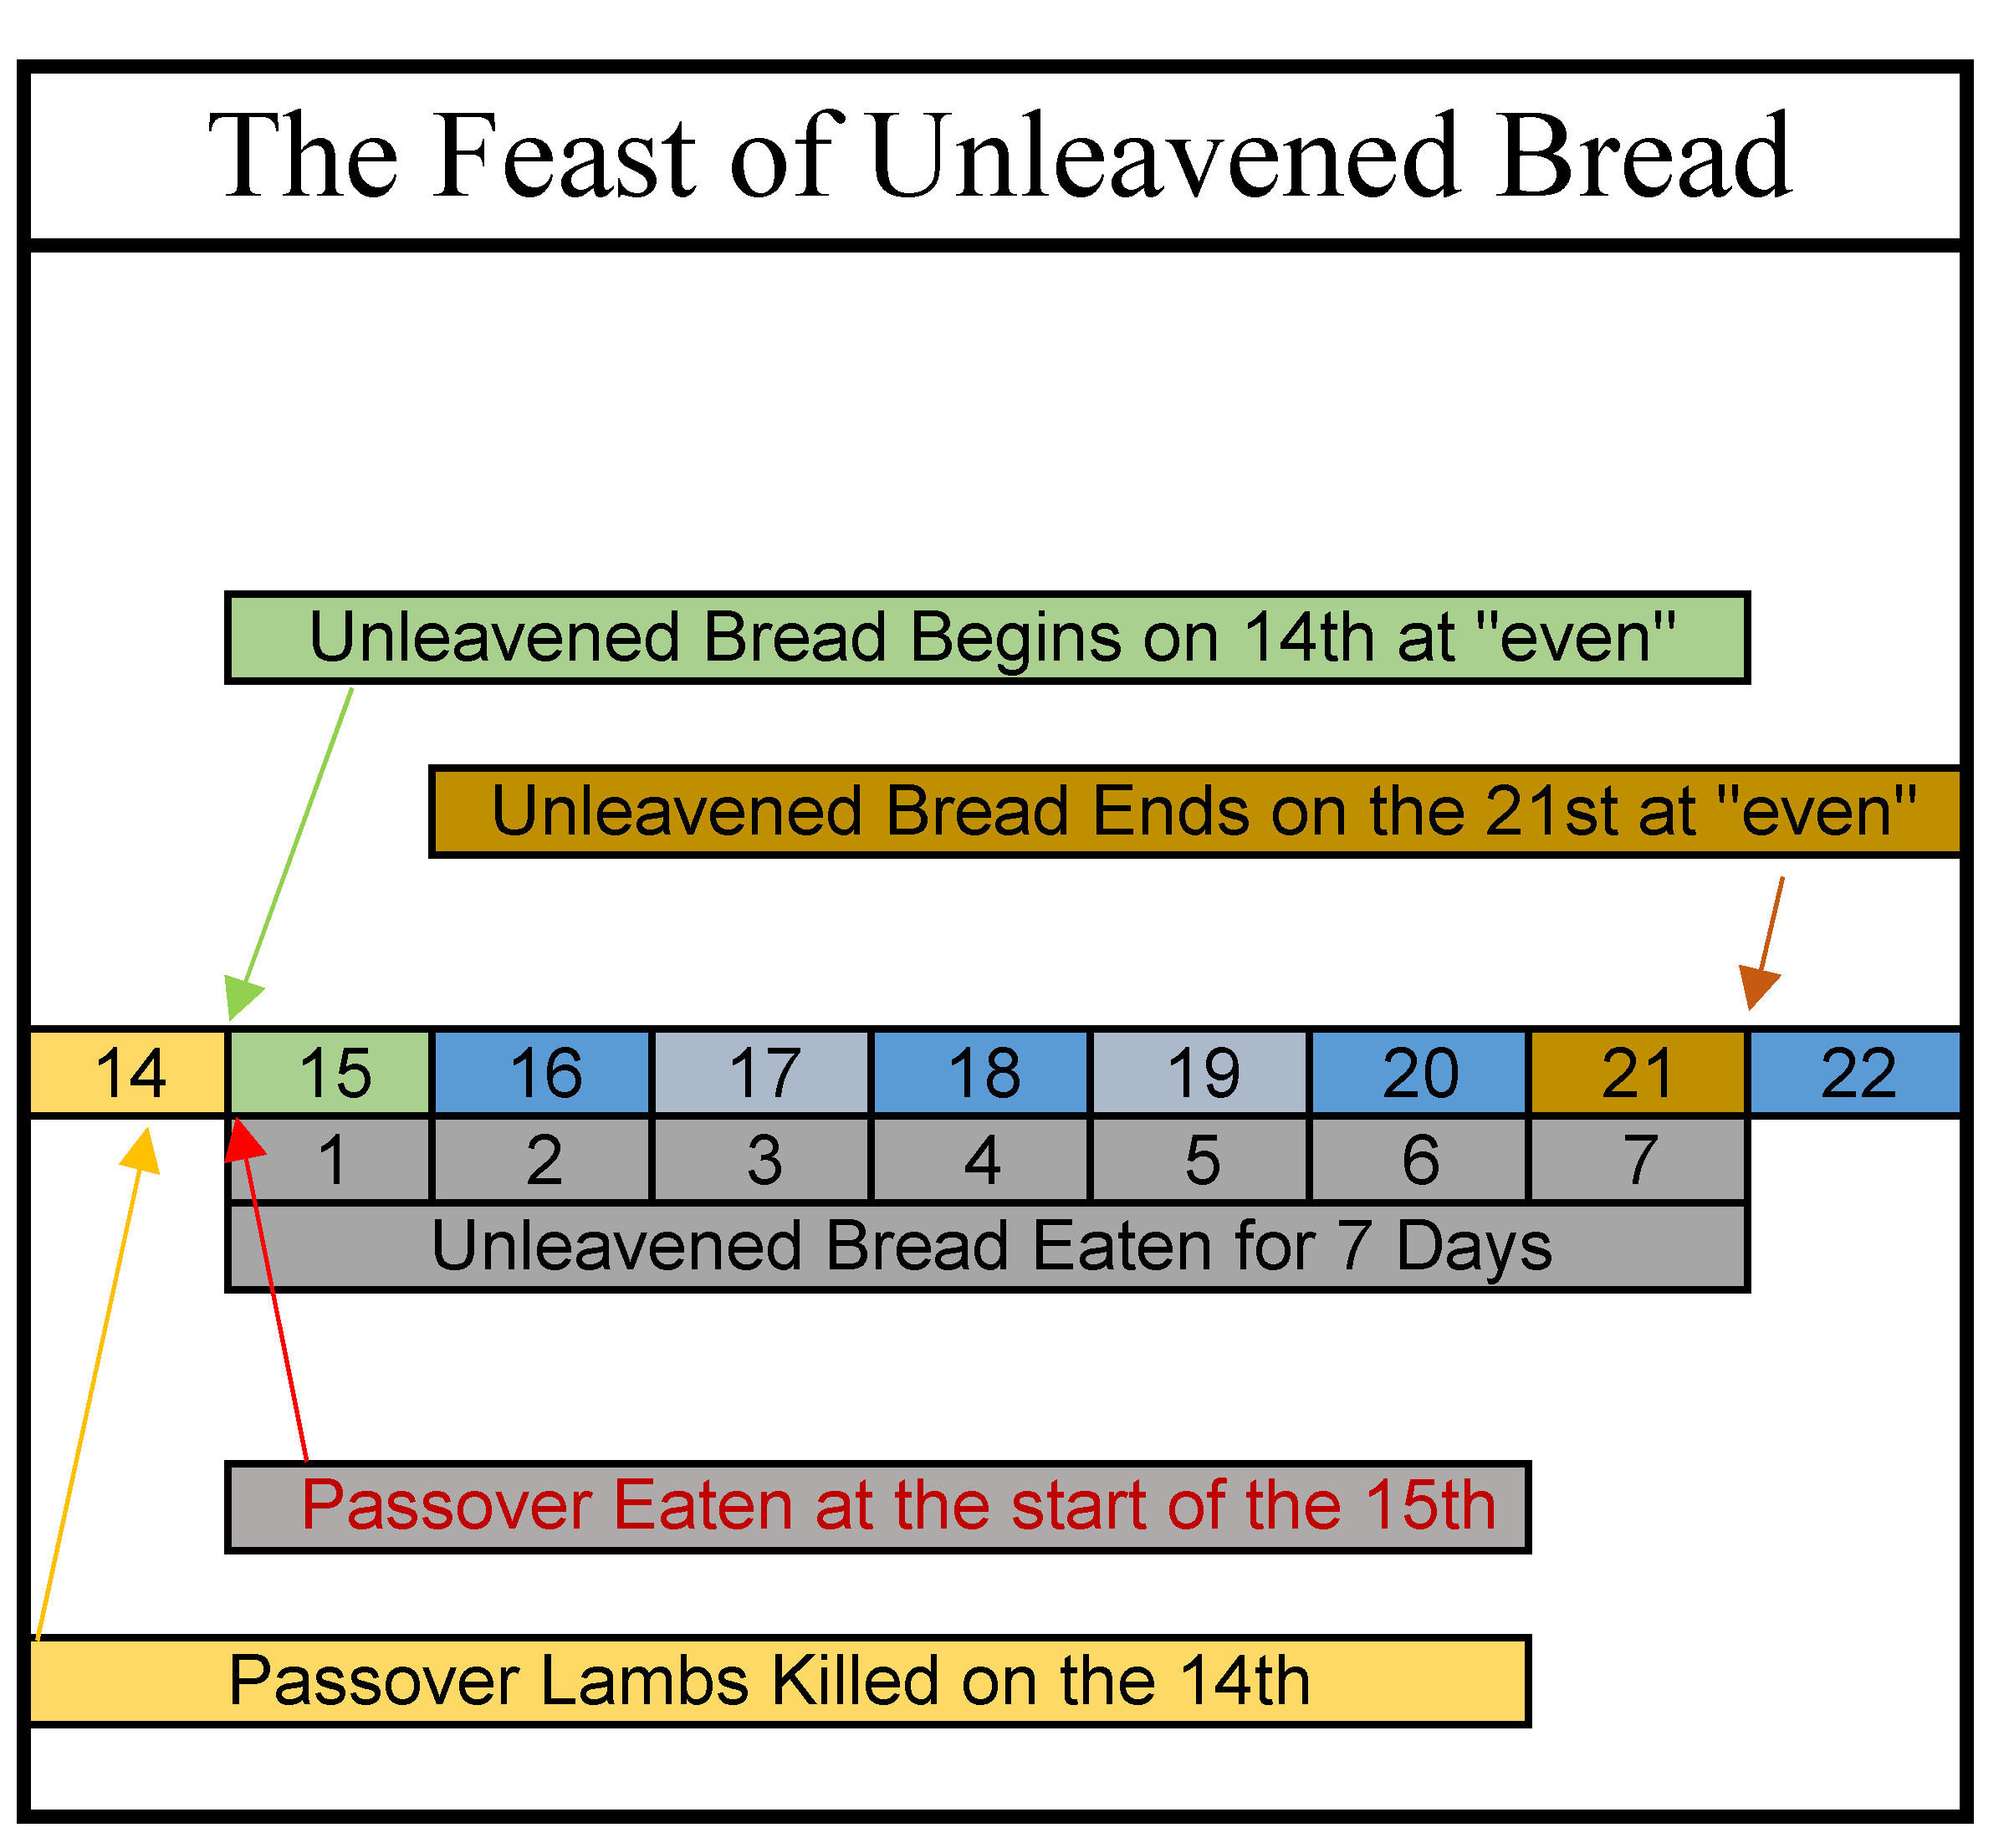 Unleavened Bread - a Feast of 7 Days